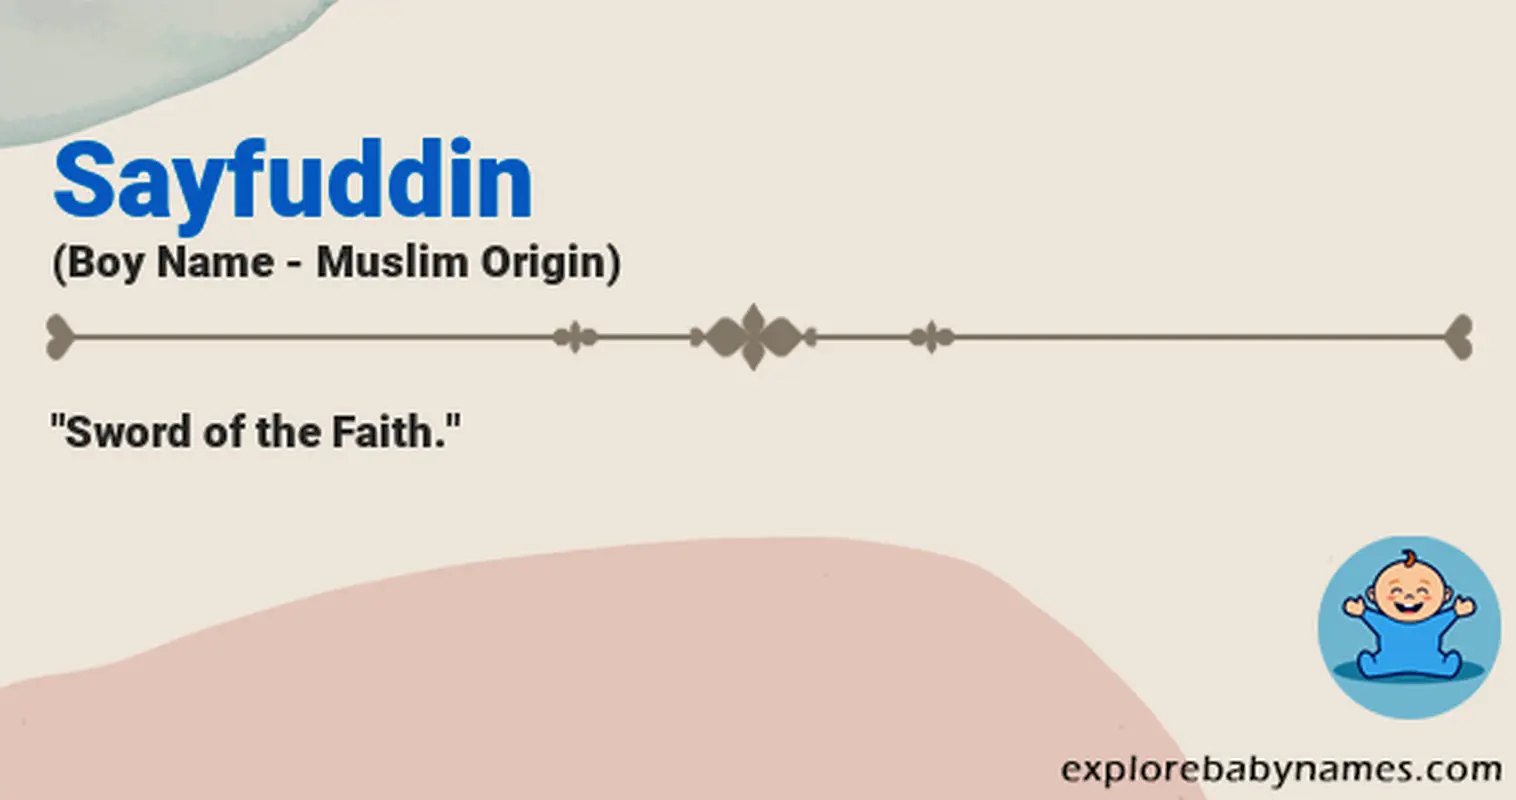 Meaning of Sayfuddin